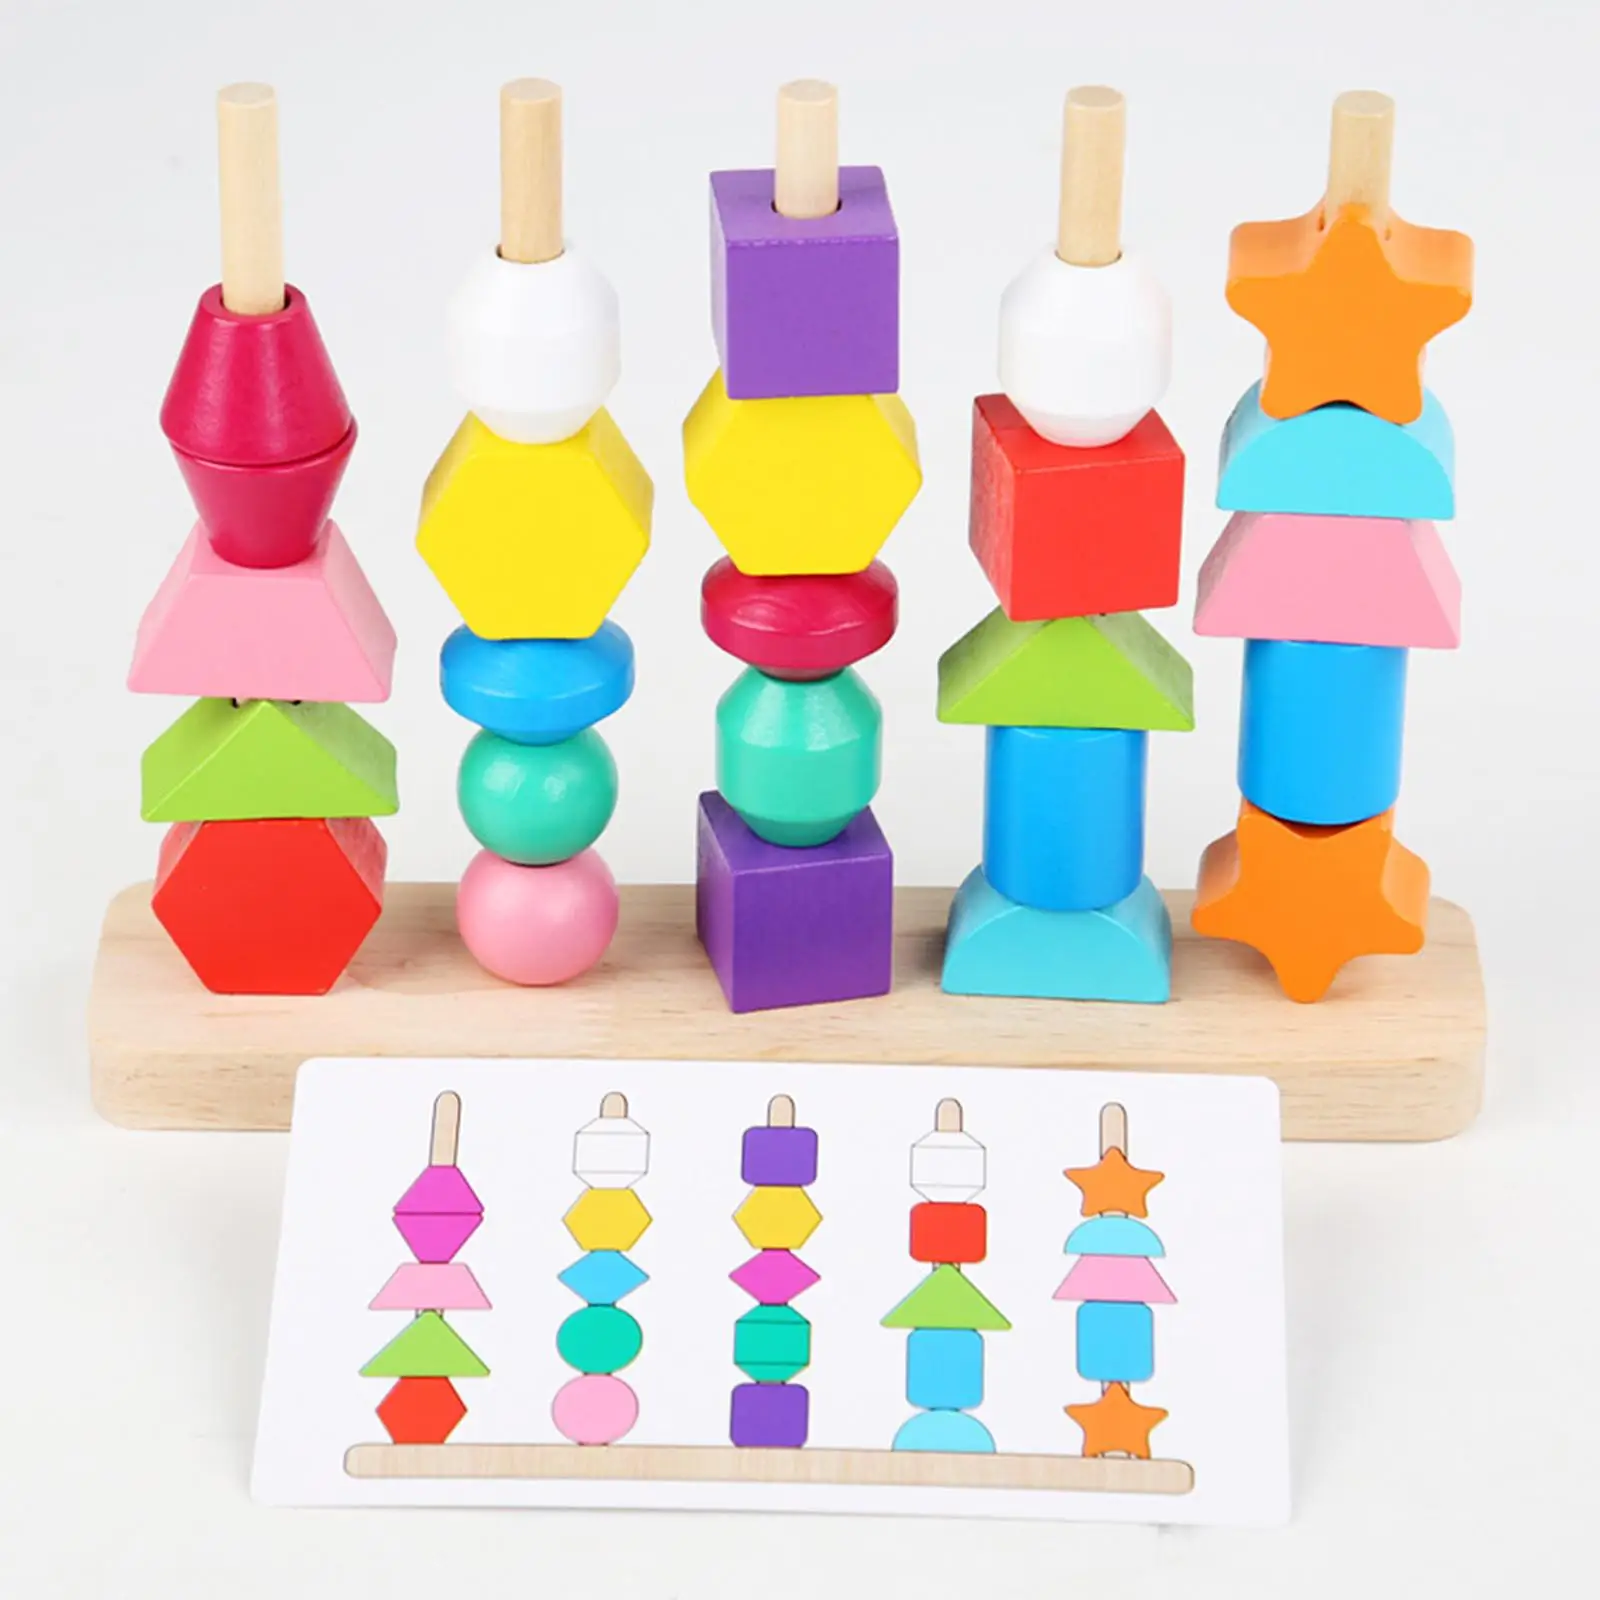 Set of Five Beaded Toys Colorful Educational Wooden Blocks for Birthday Gift